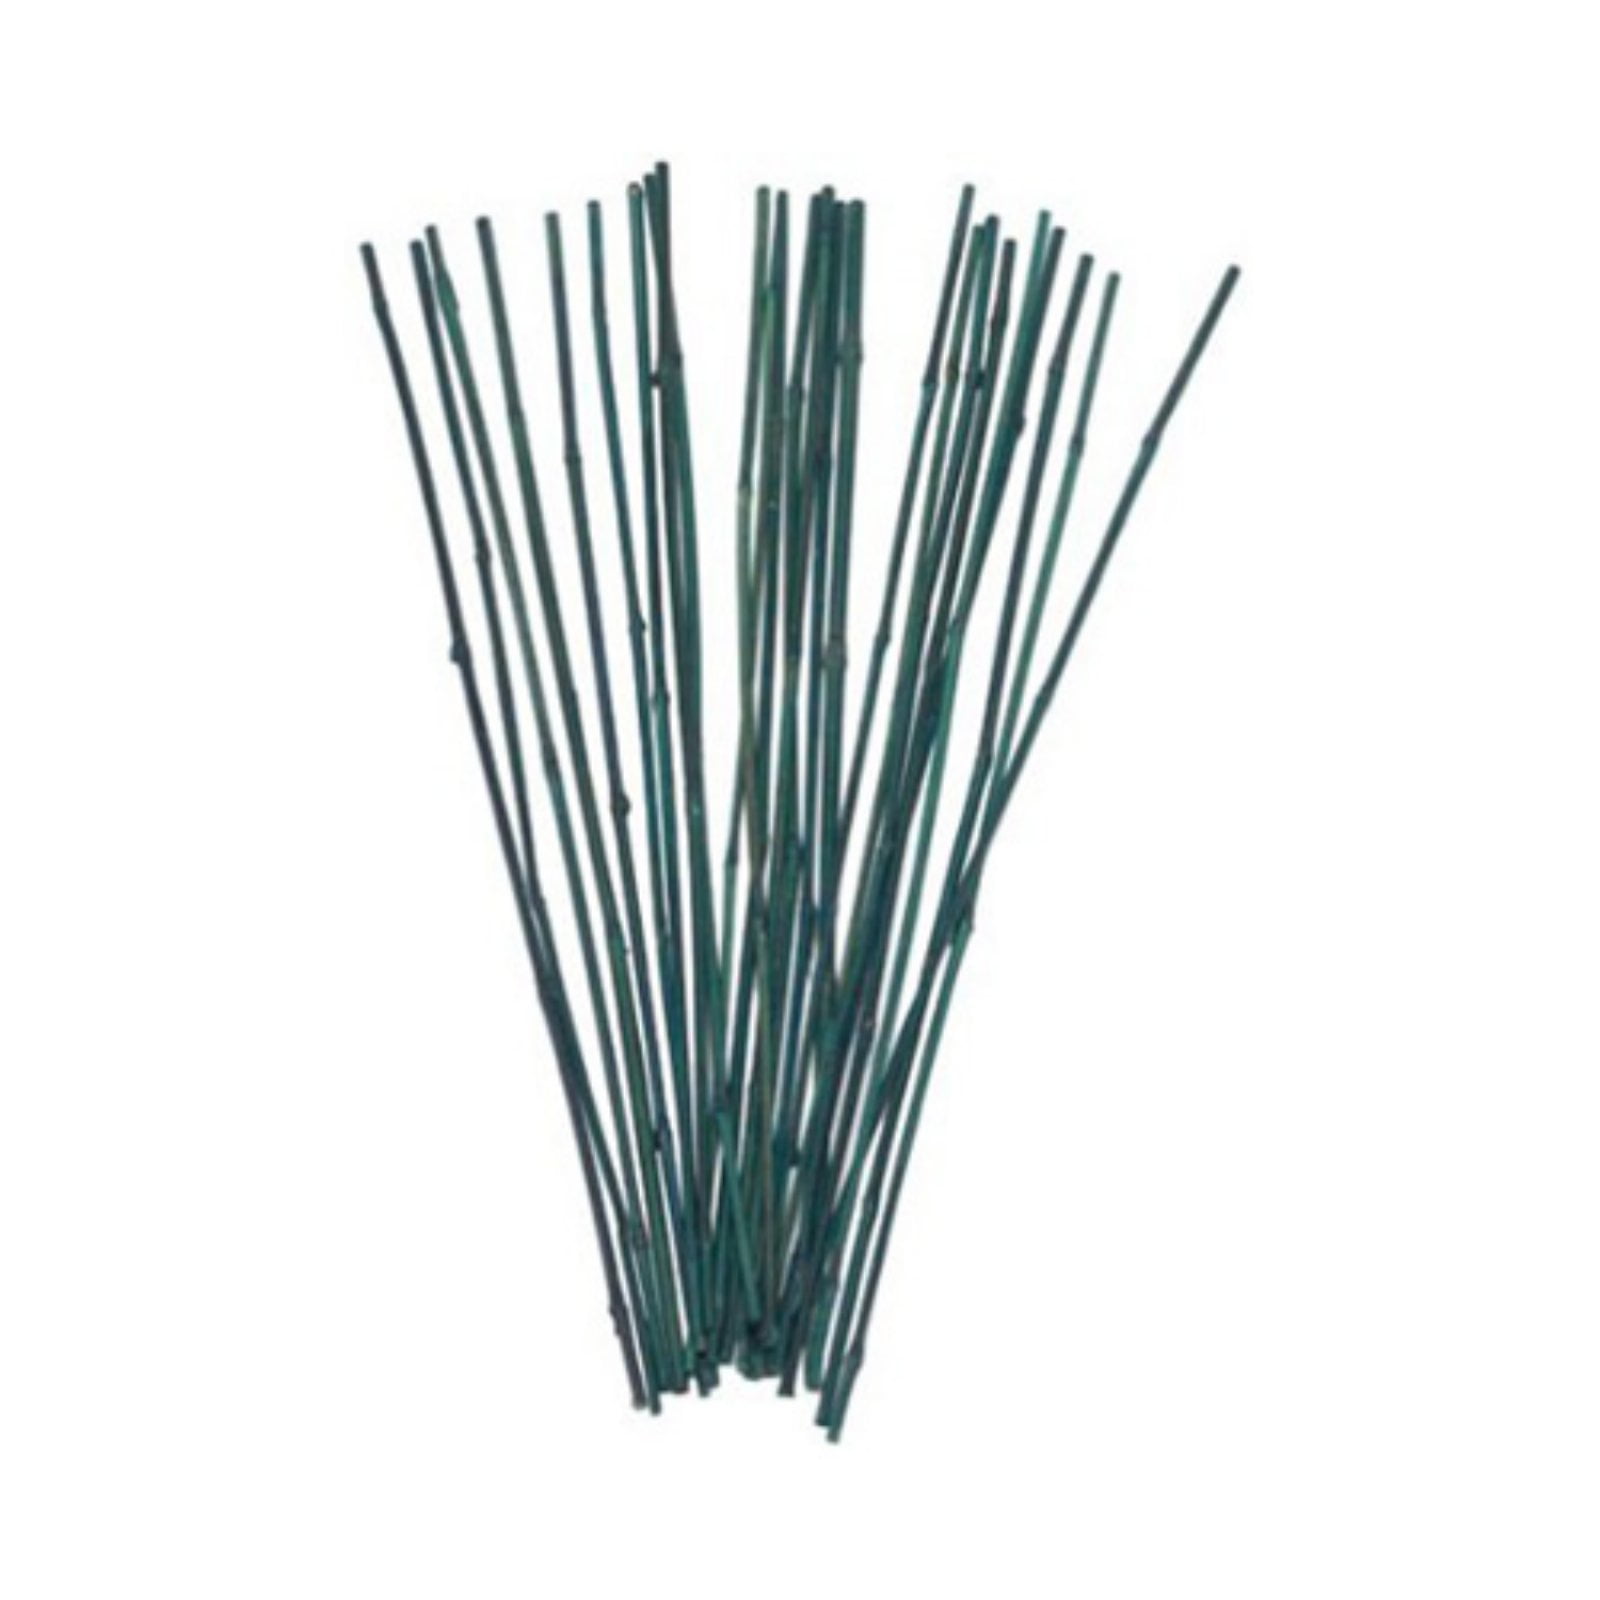 425 4 Ft. X 1.75 In. Manufacturing Green Bamboo Garden Stakes